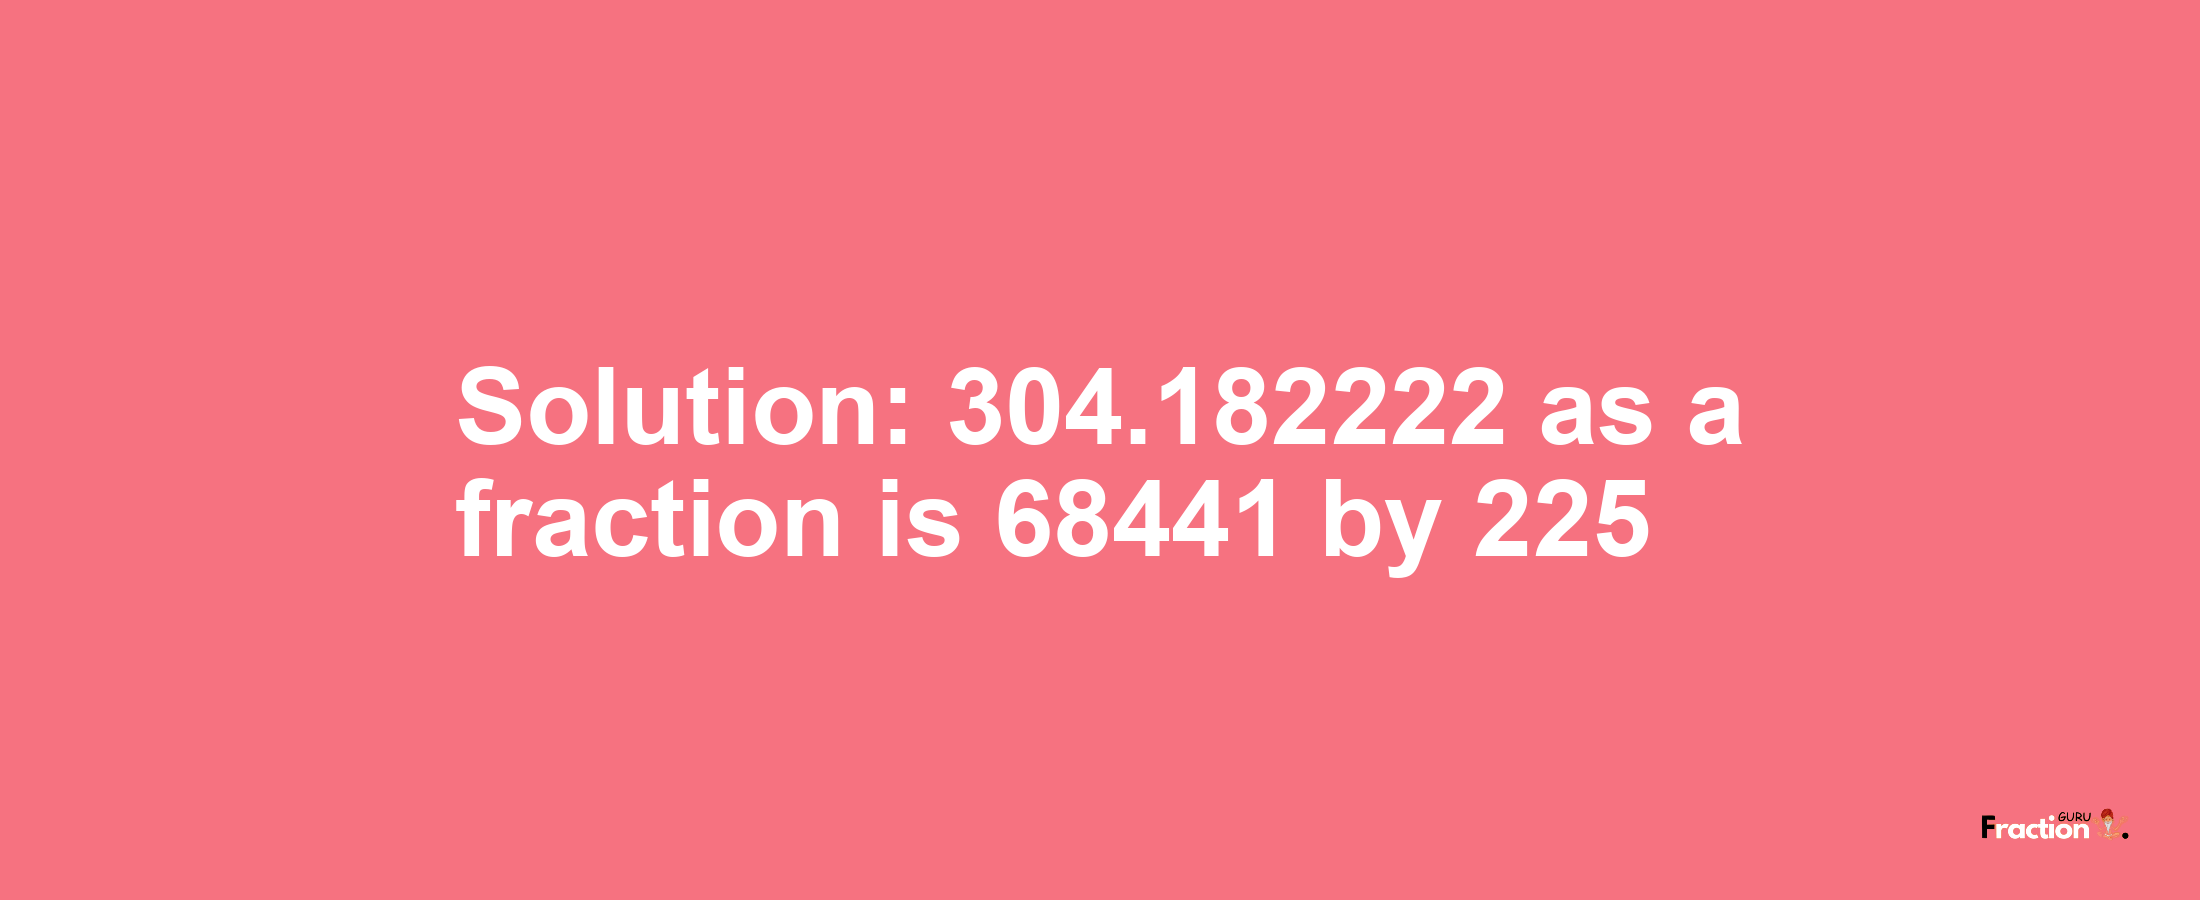 Solution:304.182222 as a fraction is 68441/225